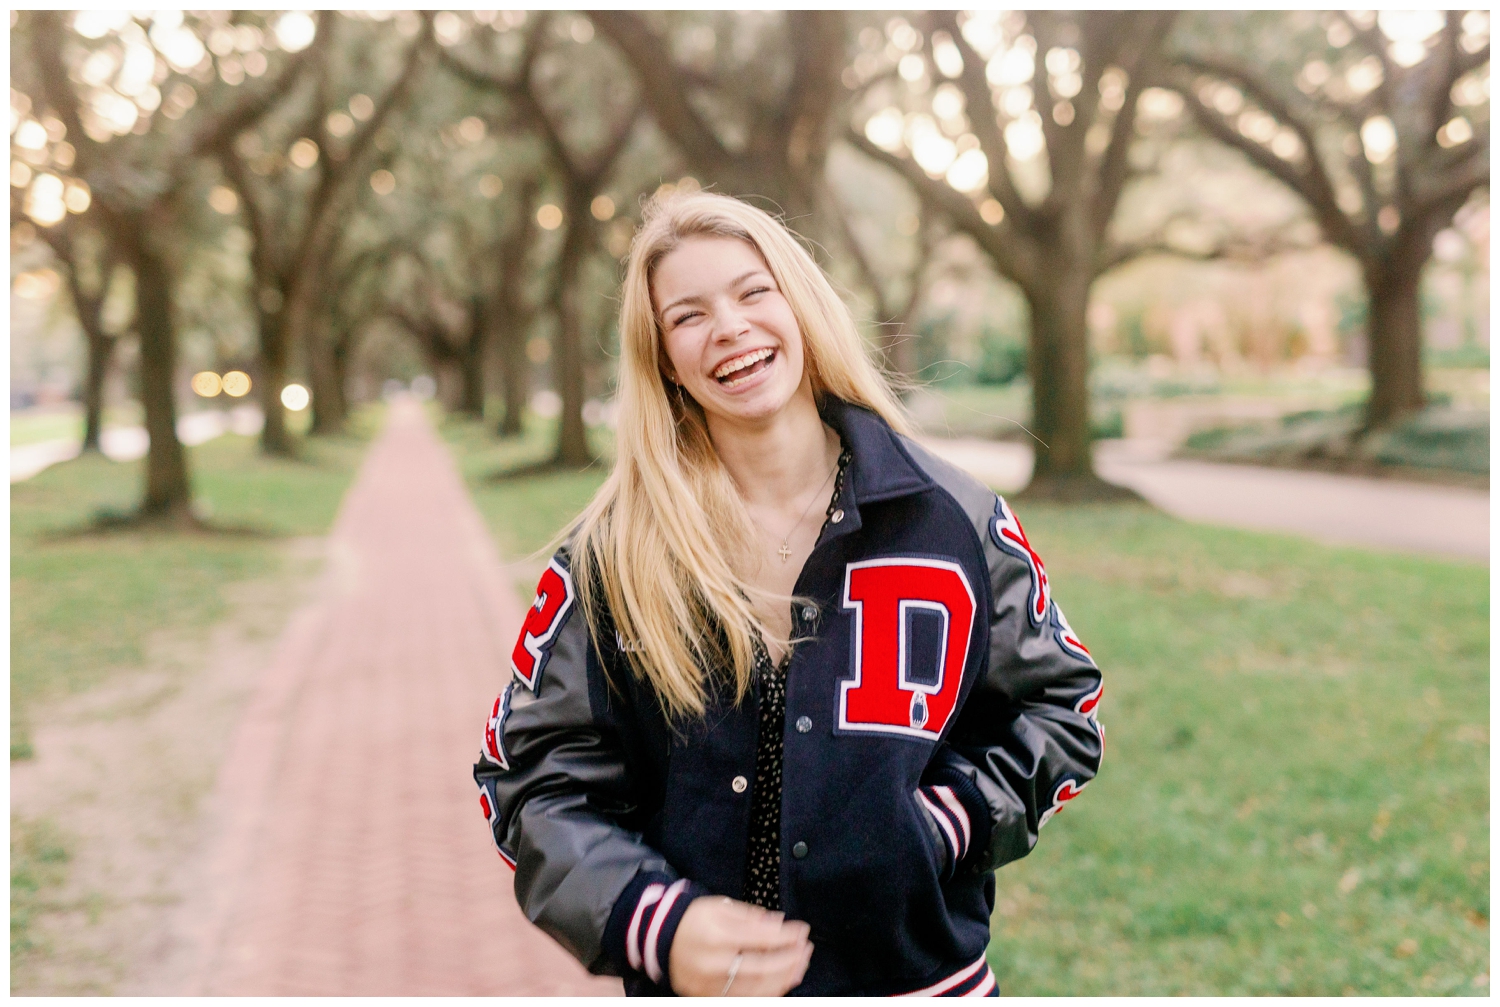 Senior Pictures South Boulevard with girl laughing wearing letter jacket